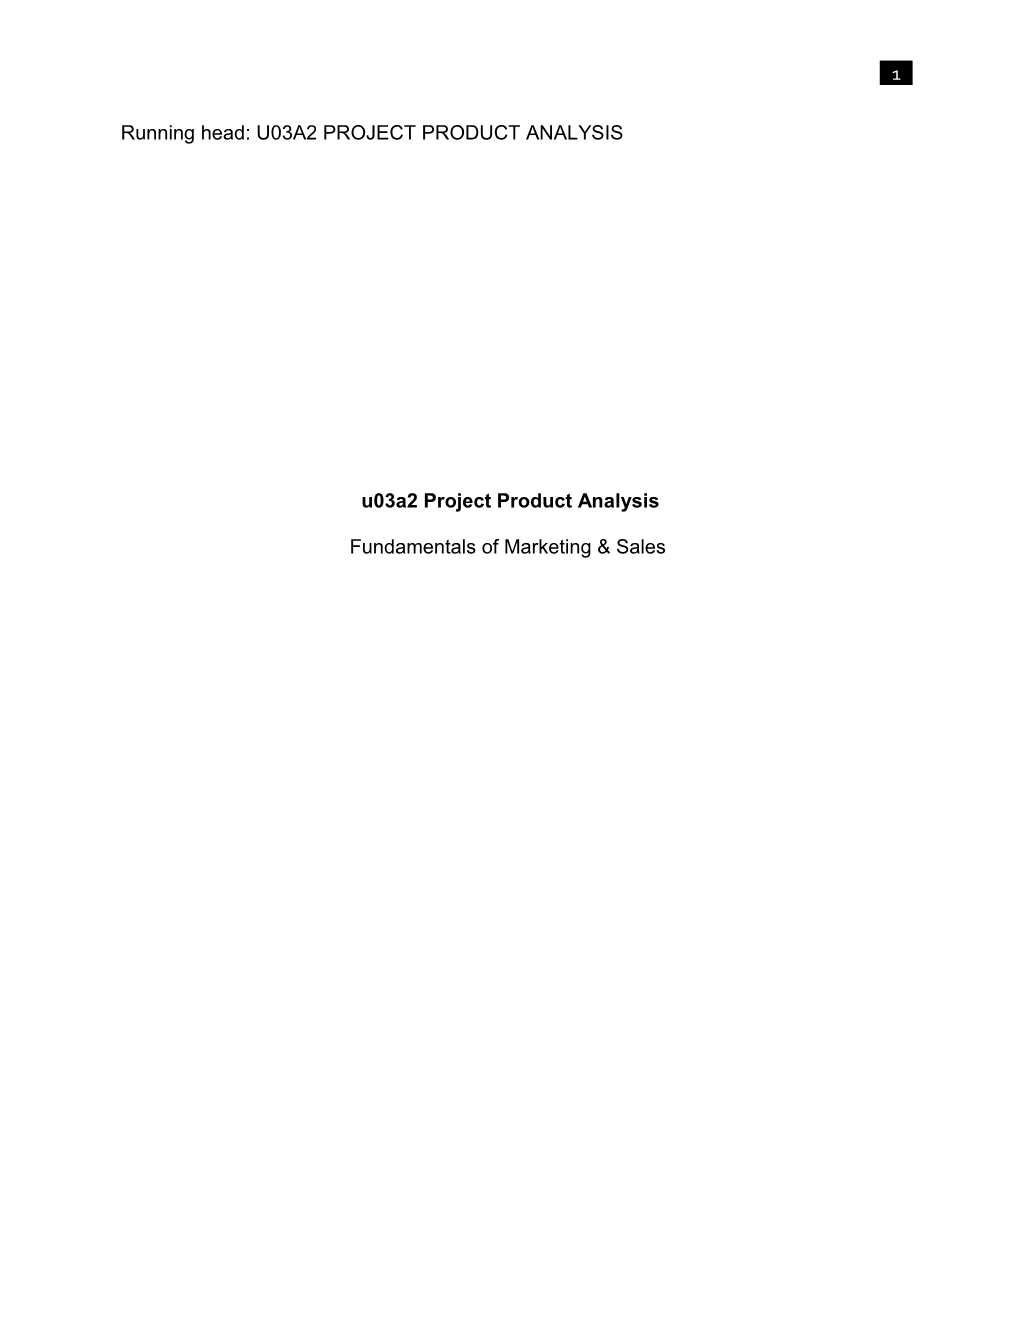 Running Head: U03A2 PROJECT PRODUCT ANALYSIS